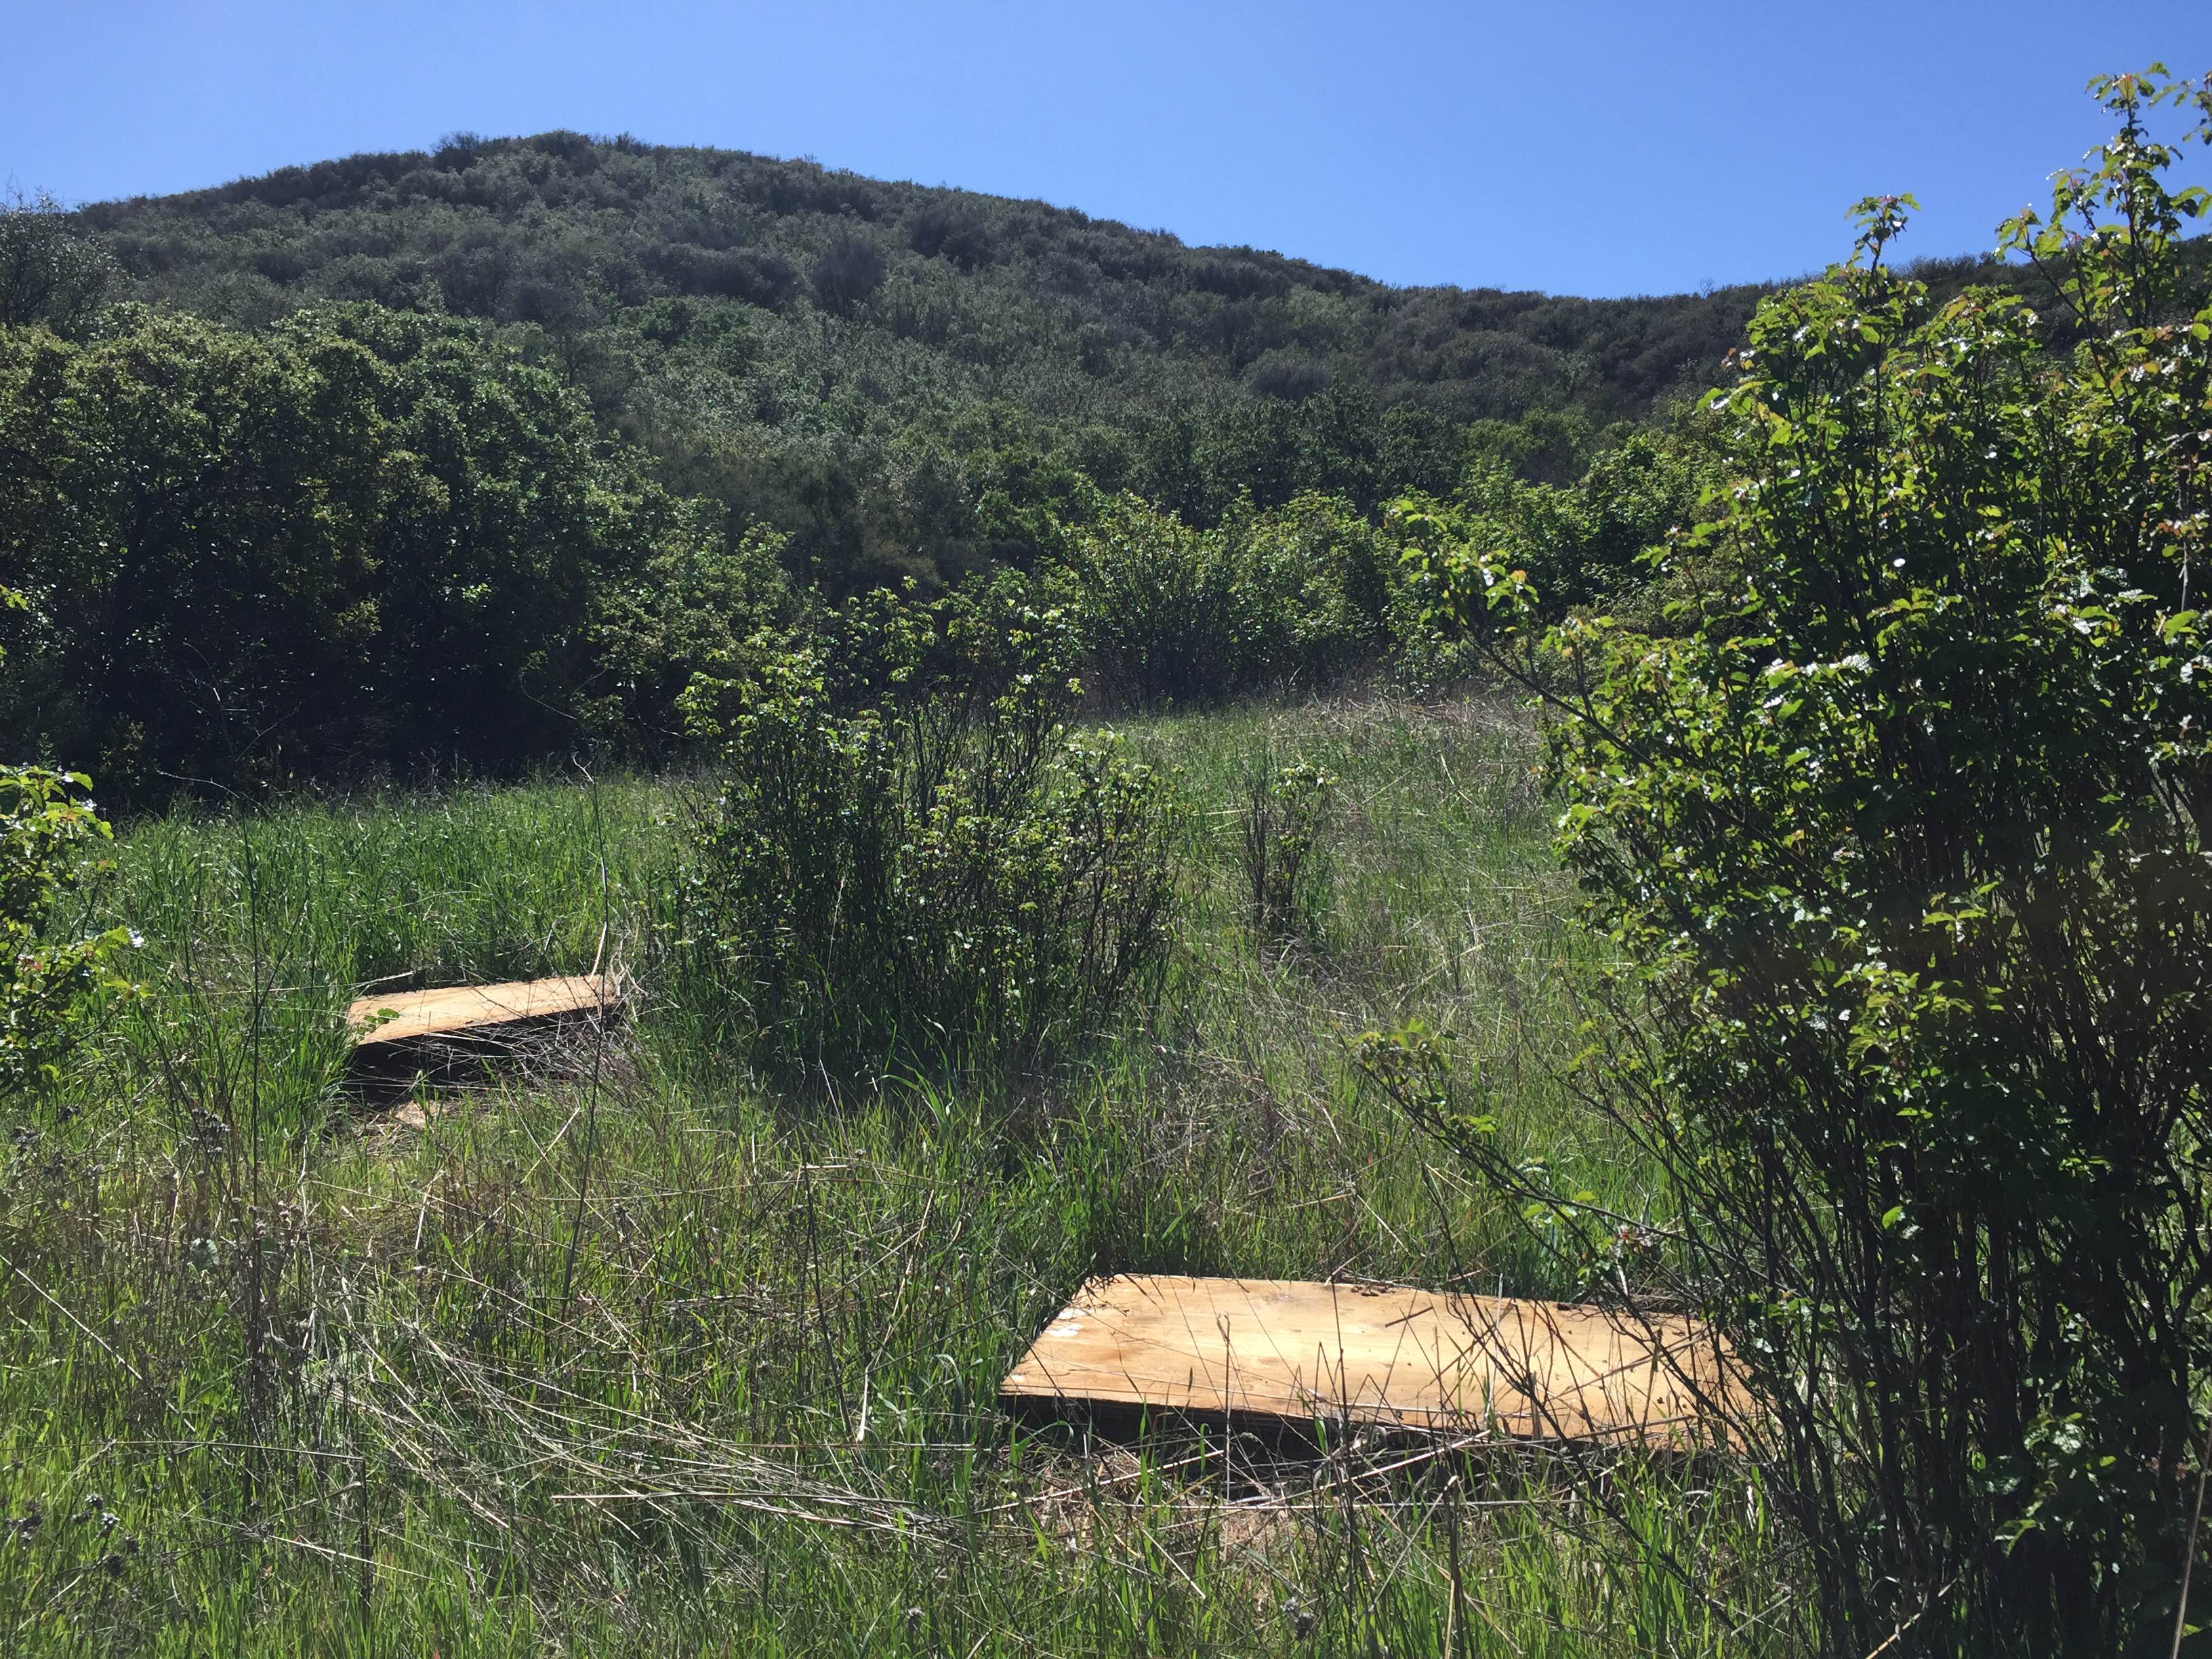 Plywood boards strewn in a field of grass in Decker Canyon of the Santa Monica Mountains. (Photo: National Park Service)